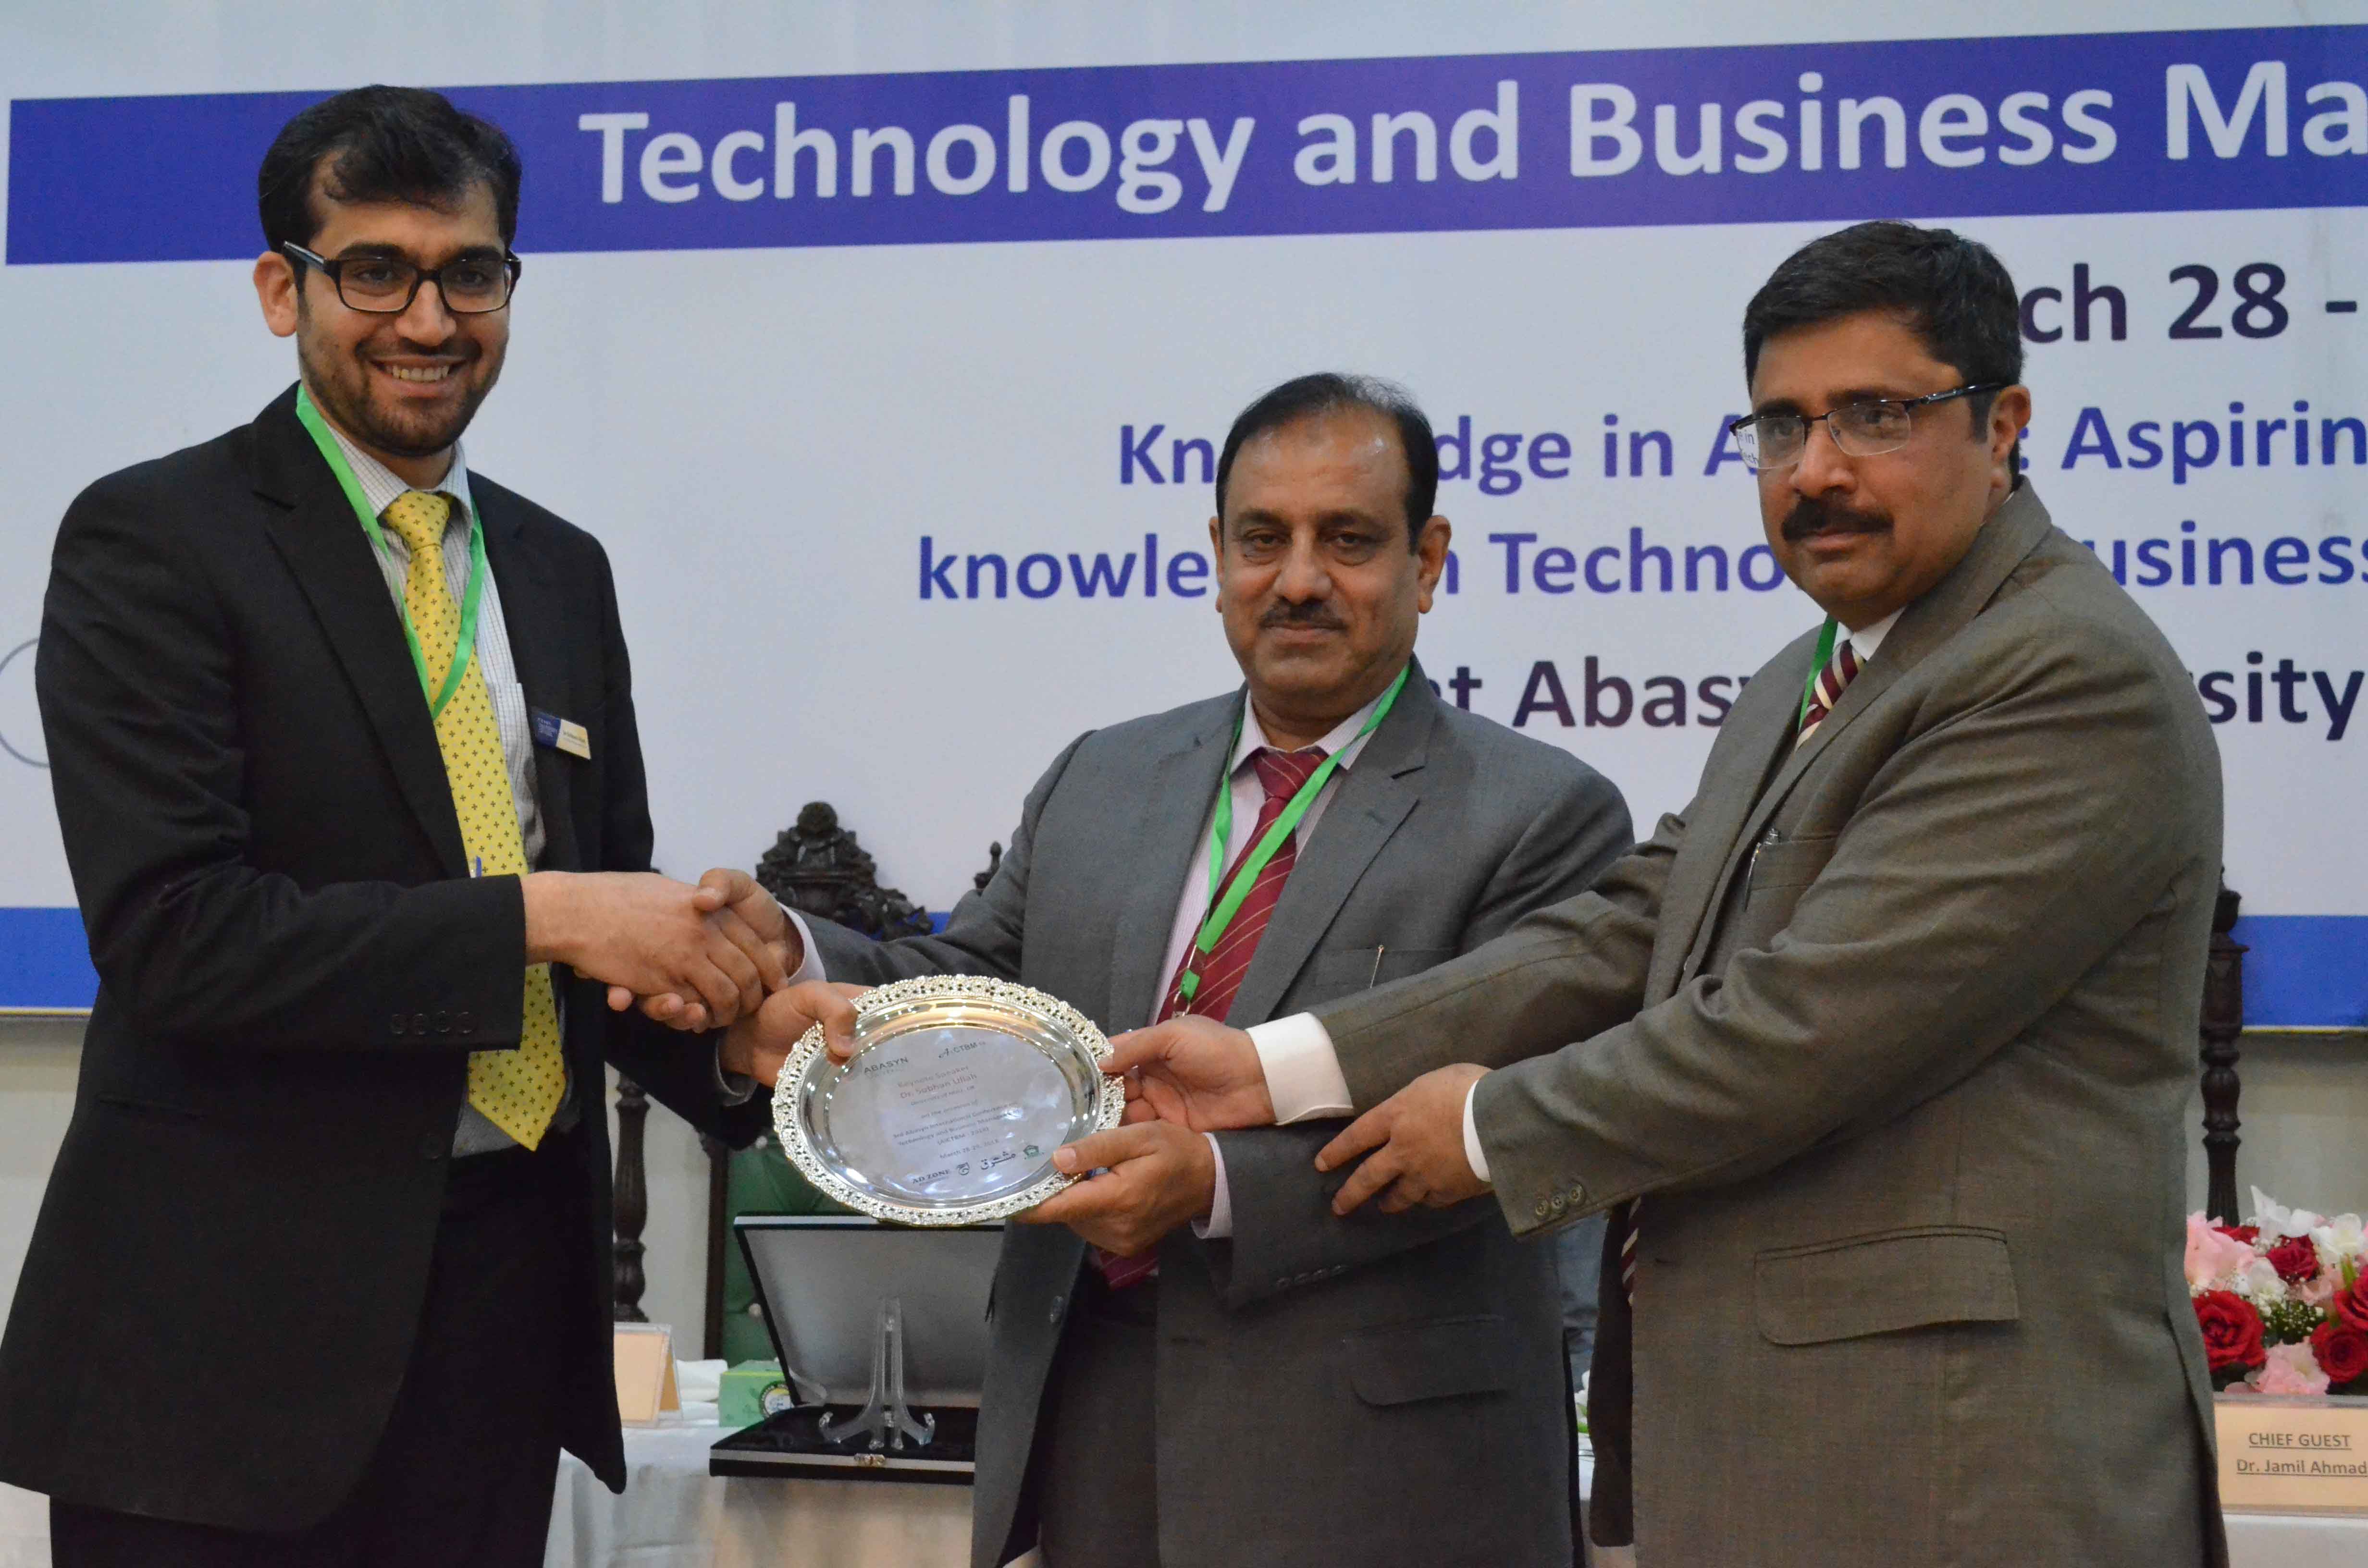 Chief guest Dr. Jamil Ahmad and Chancellor Abasyn University is presenting shield to the guest speaker Dr. Subhan Ullah (Lecturer in Accounting, The U